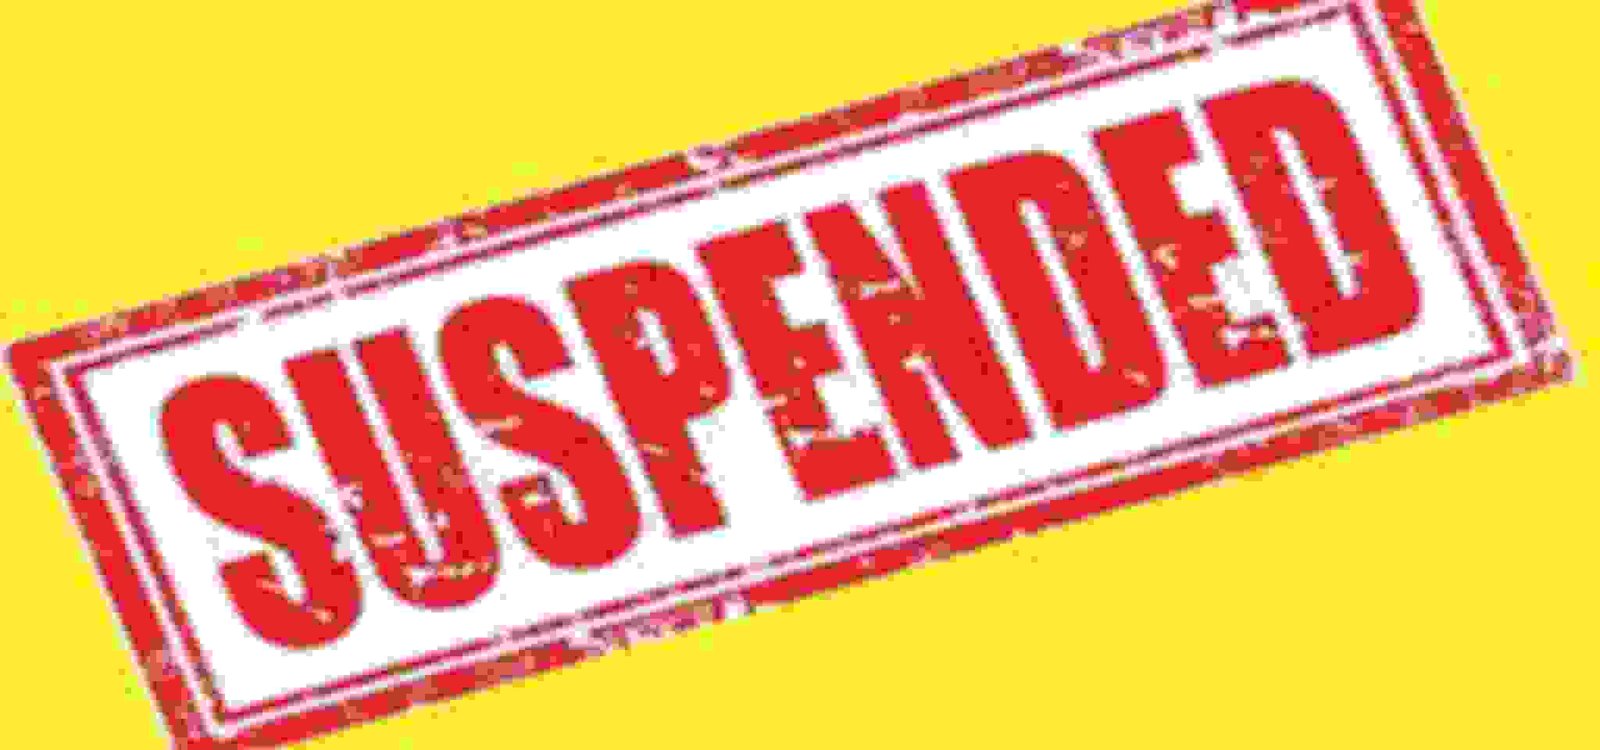 Group Education Officer in charge of Akole Panchayat Samiti suspended